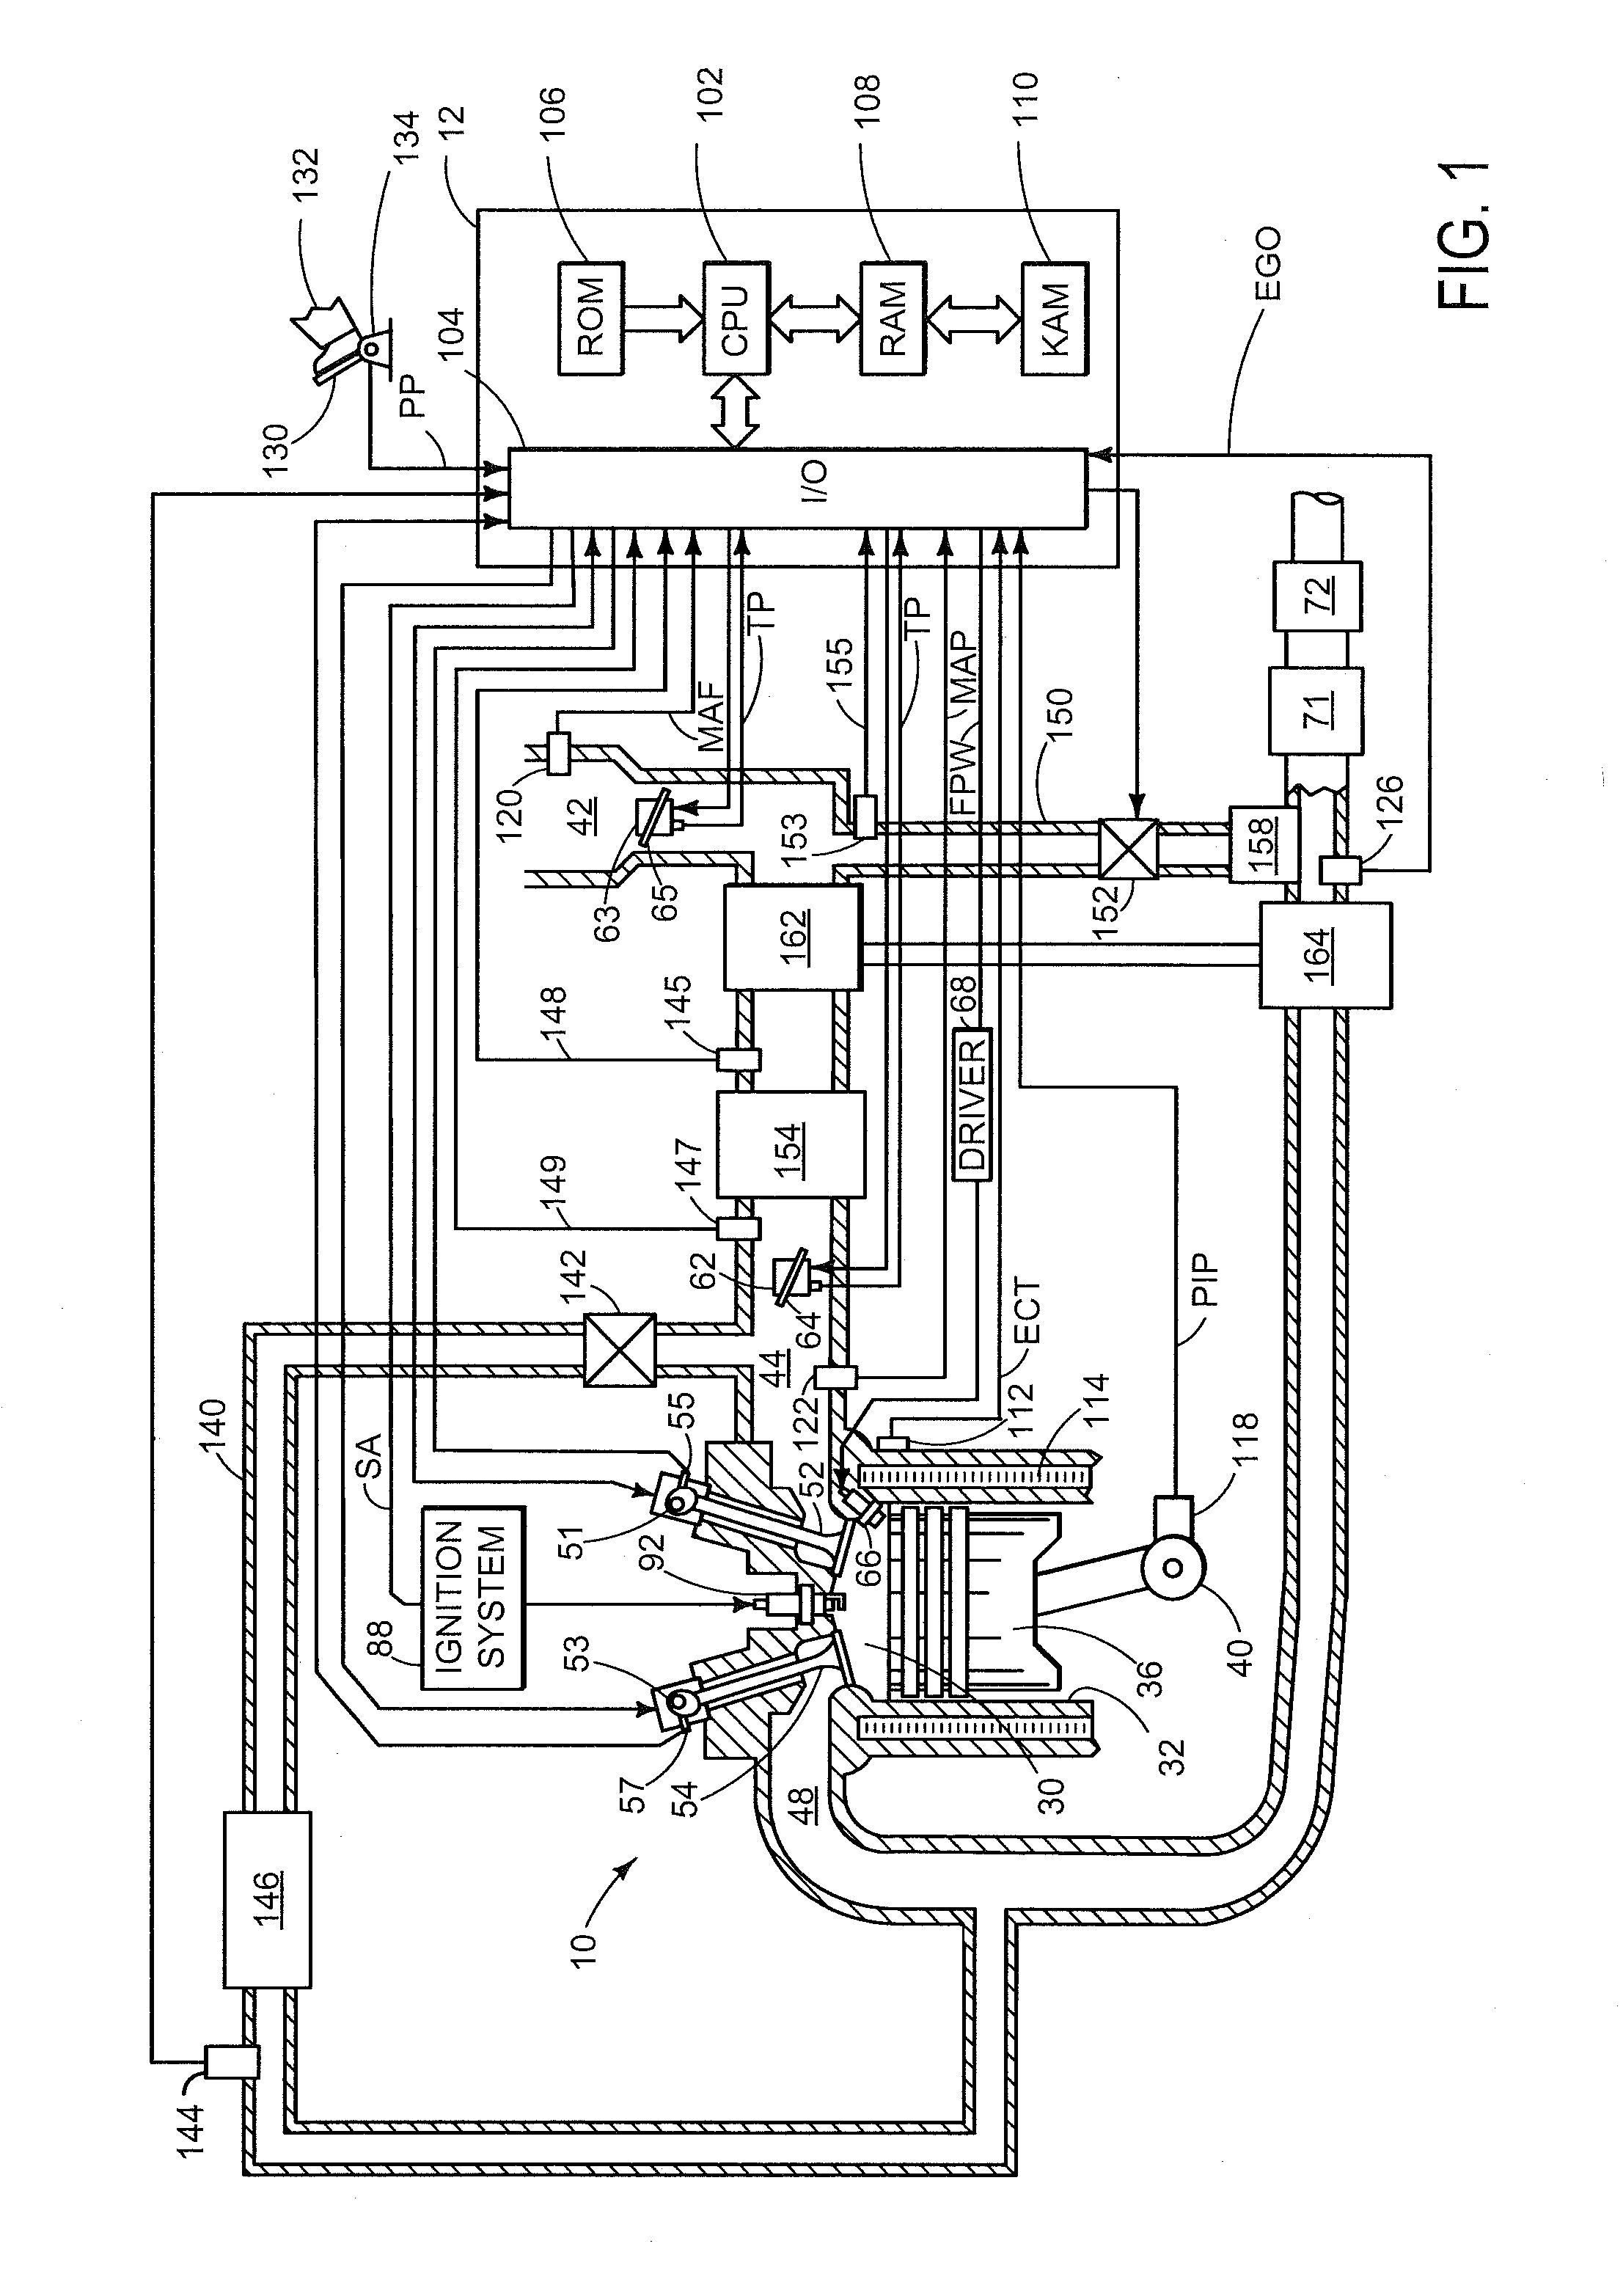 Method and system for improved dilution tolerance